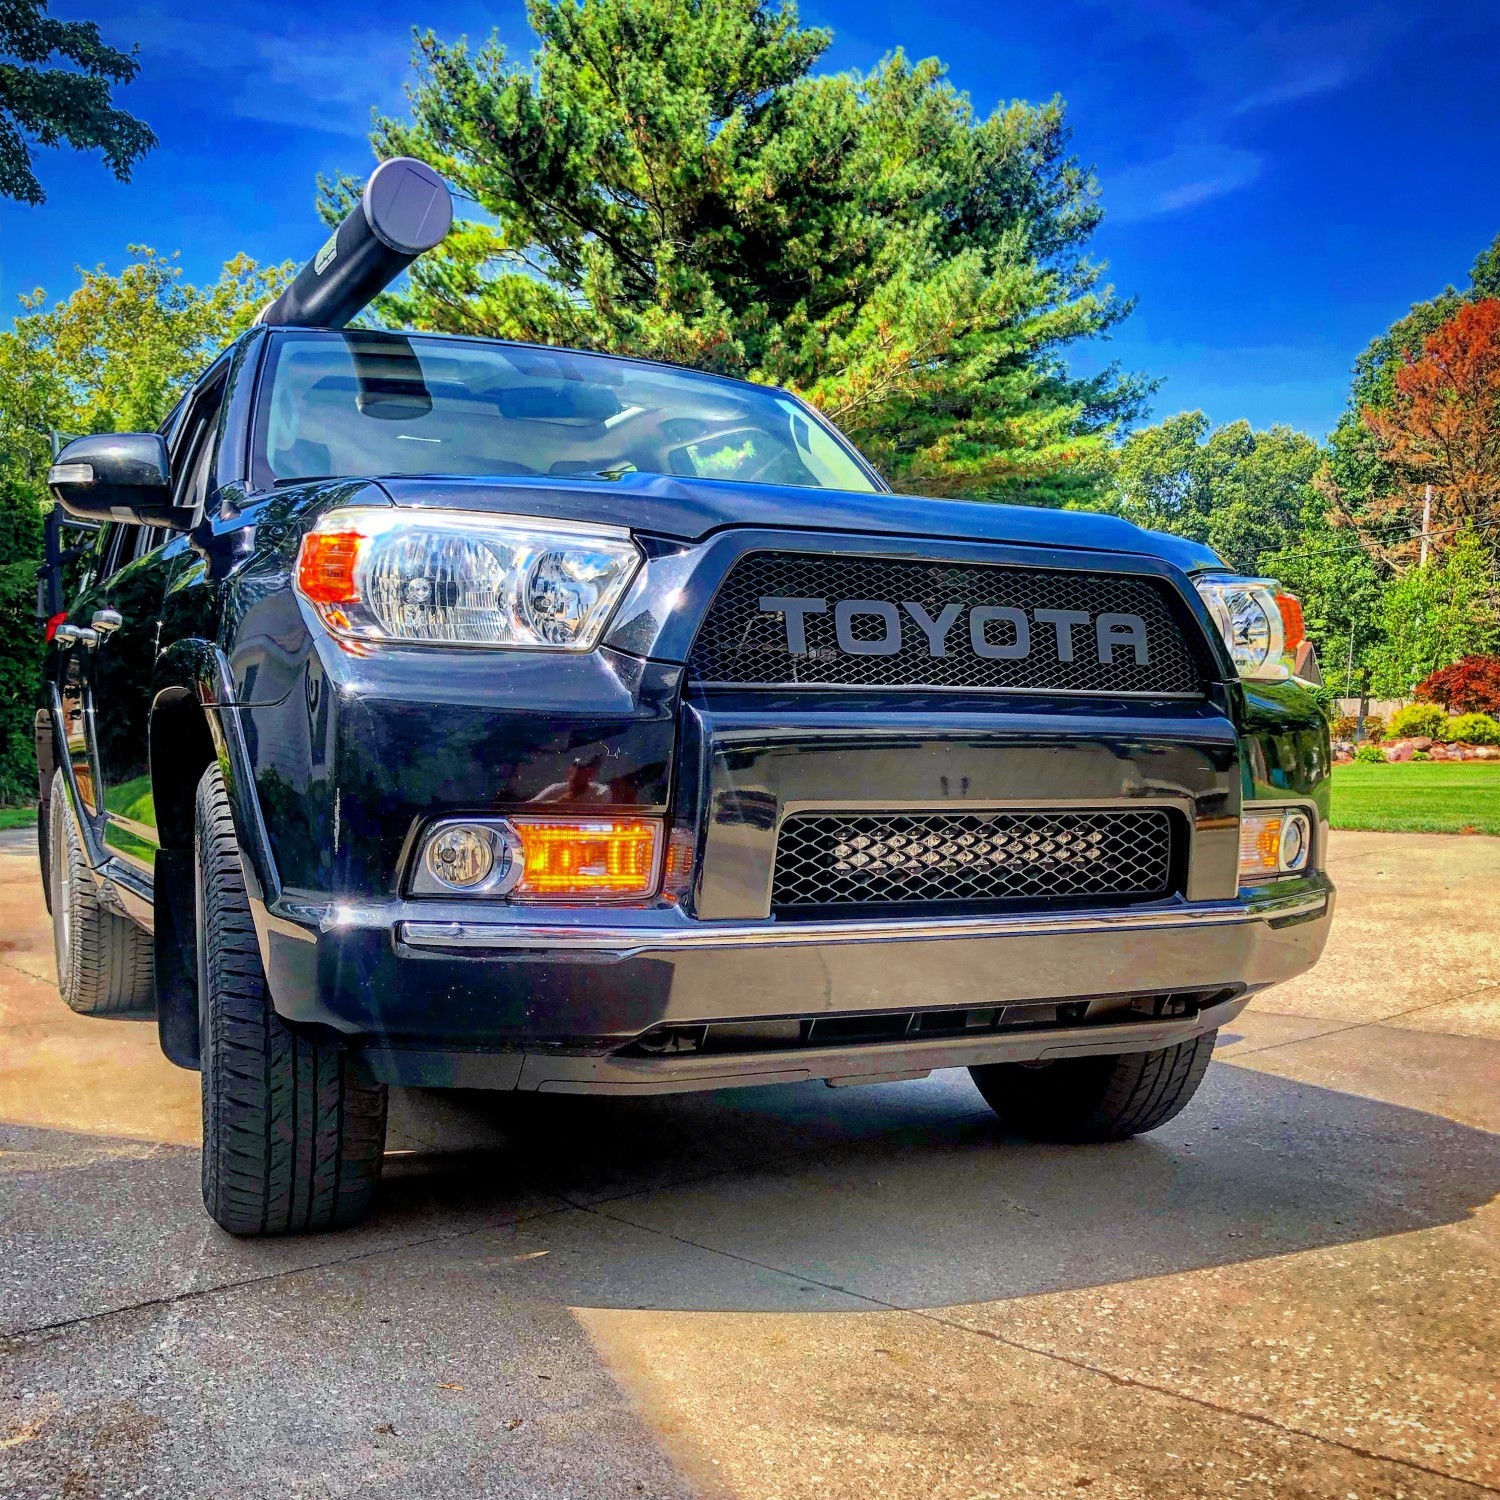 2010-13 Toyota 4Runner Grill Mesh and Big Letters #2